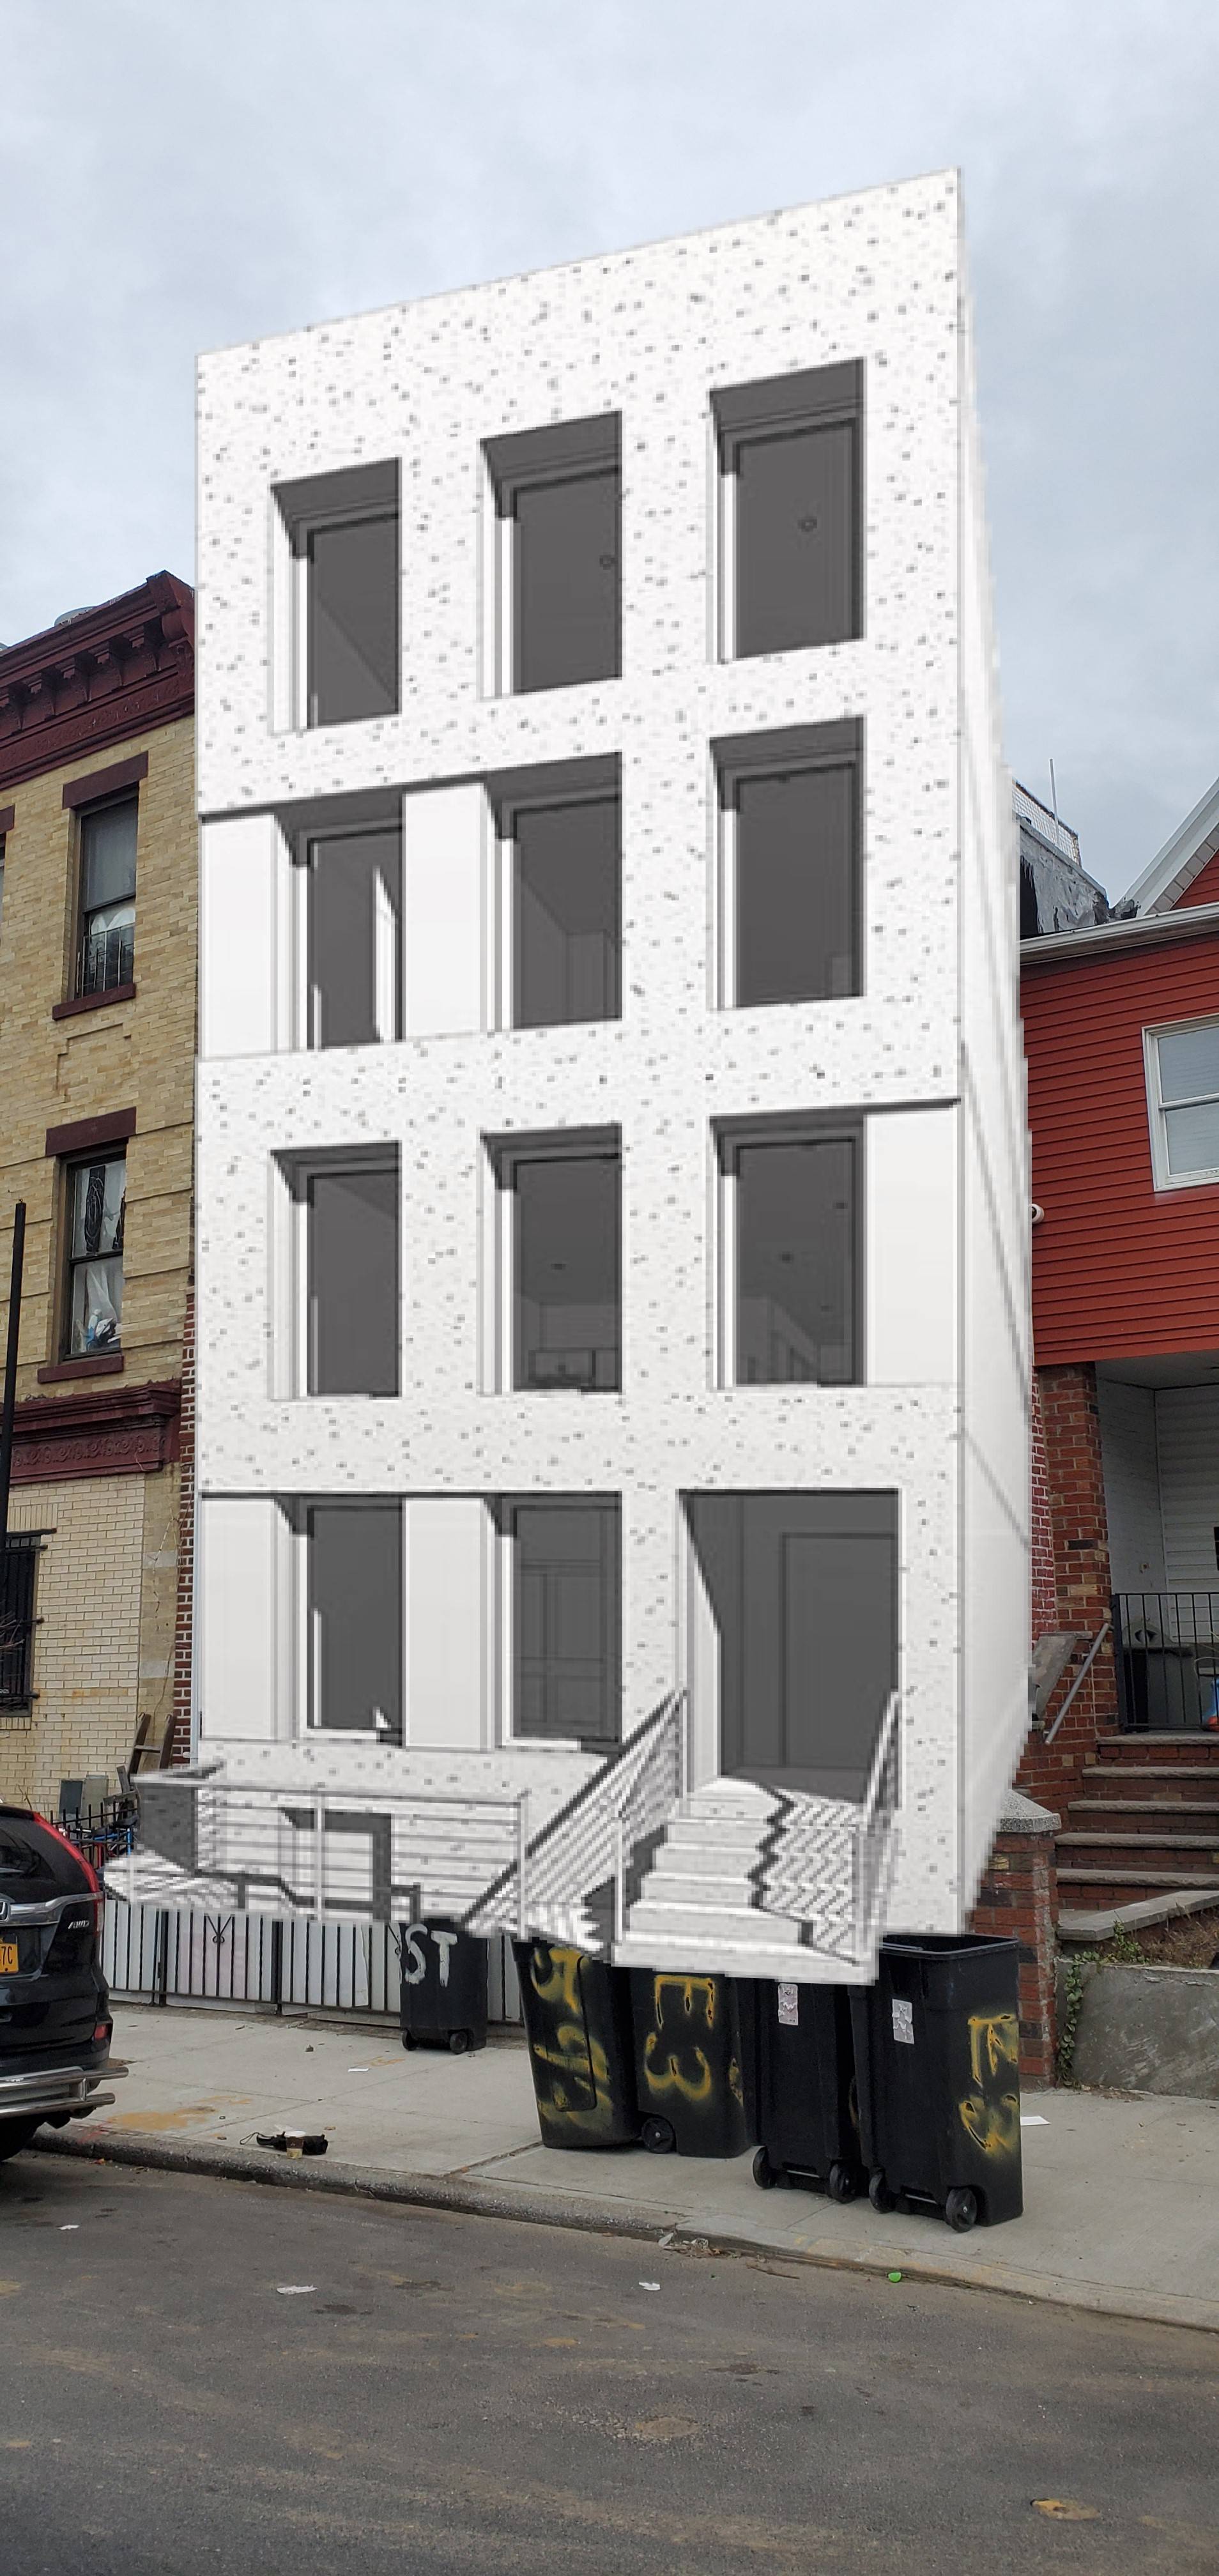 591 East 3rd Street Brooklyn, NY 11218.         Take Advantage of this Amazing Opportunity to Re-Develop or Gut Renovate this Legal 5 unit building. Proj. 5.5% Cap. Rate                         (R6-A Zoning, FAR-3 ) Air Rights incl.